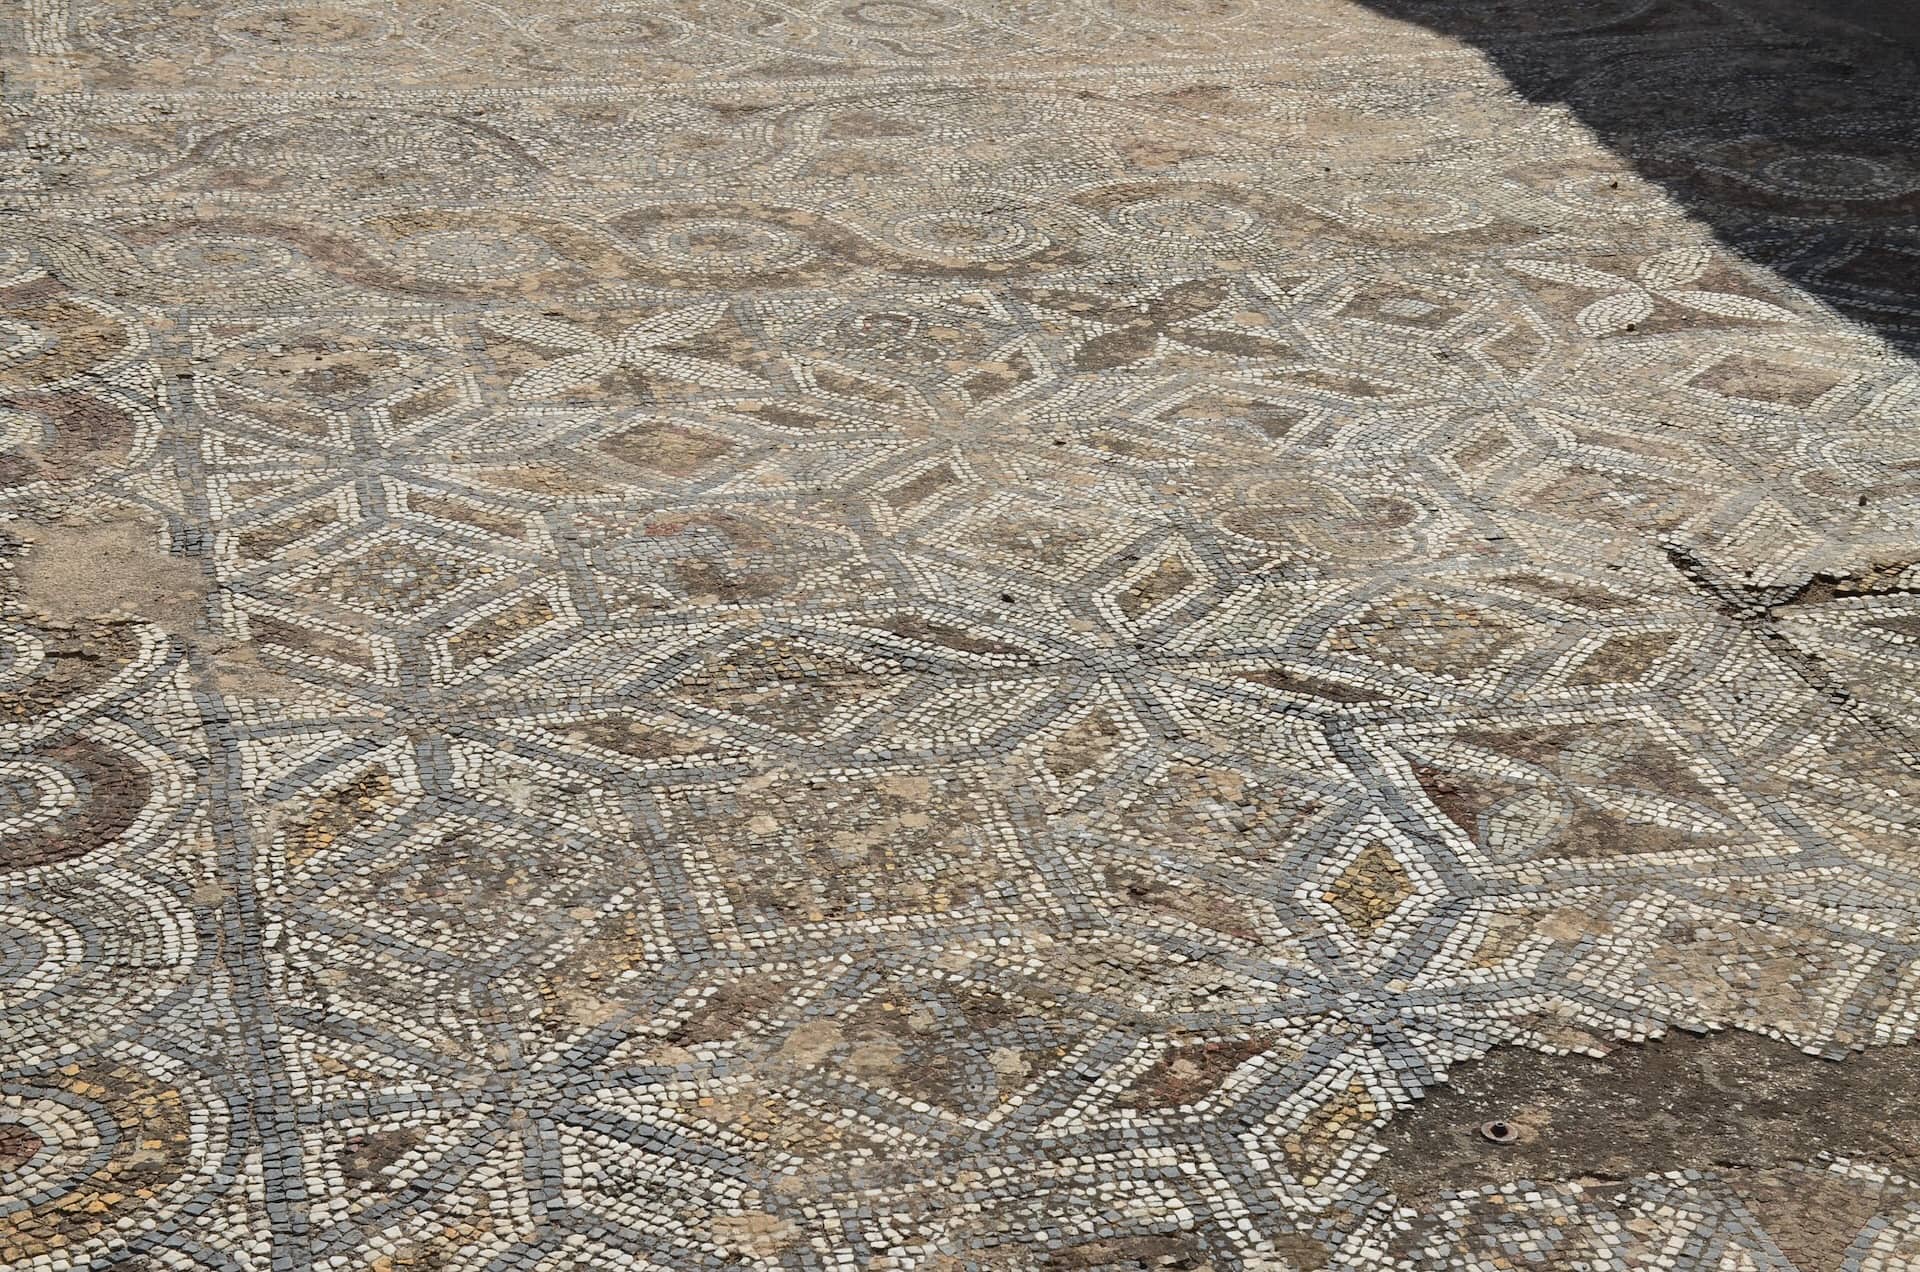 Lower end of the mosaic on Alytarch's Stoa